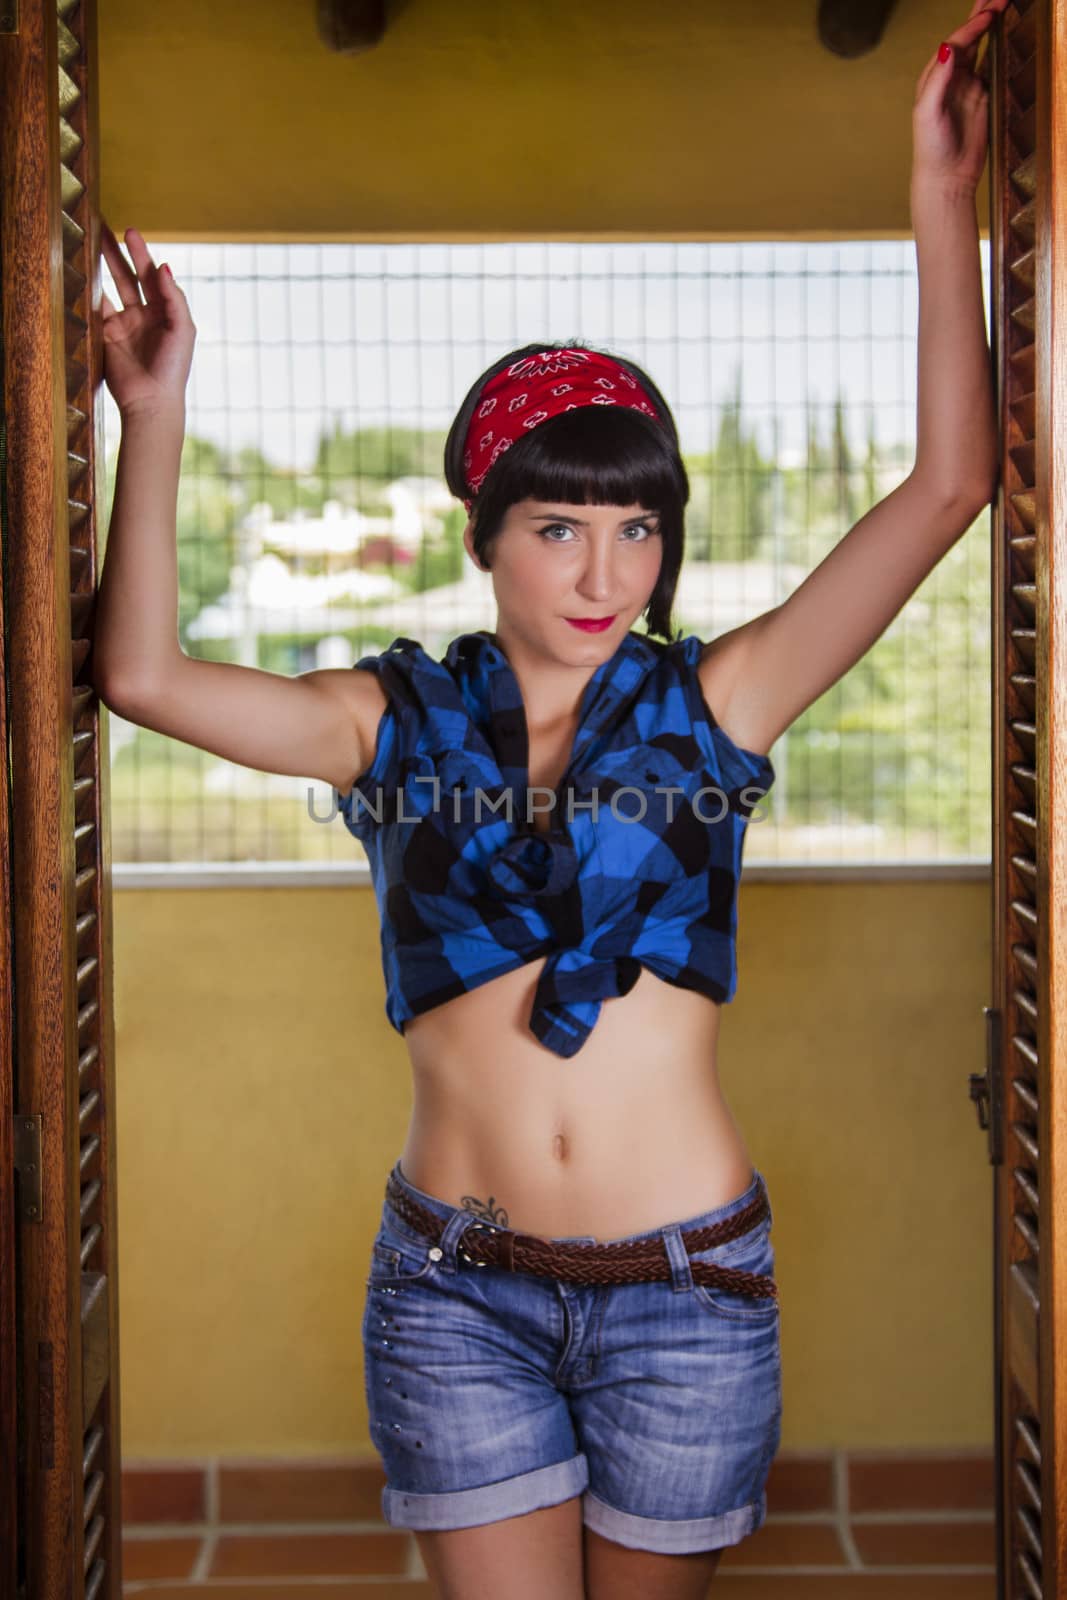 View of a pin-up girl happy with short hair.